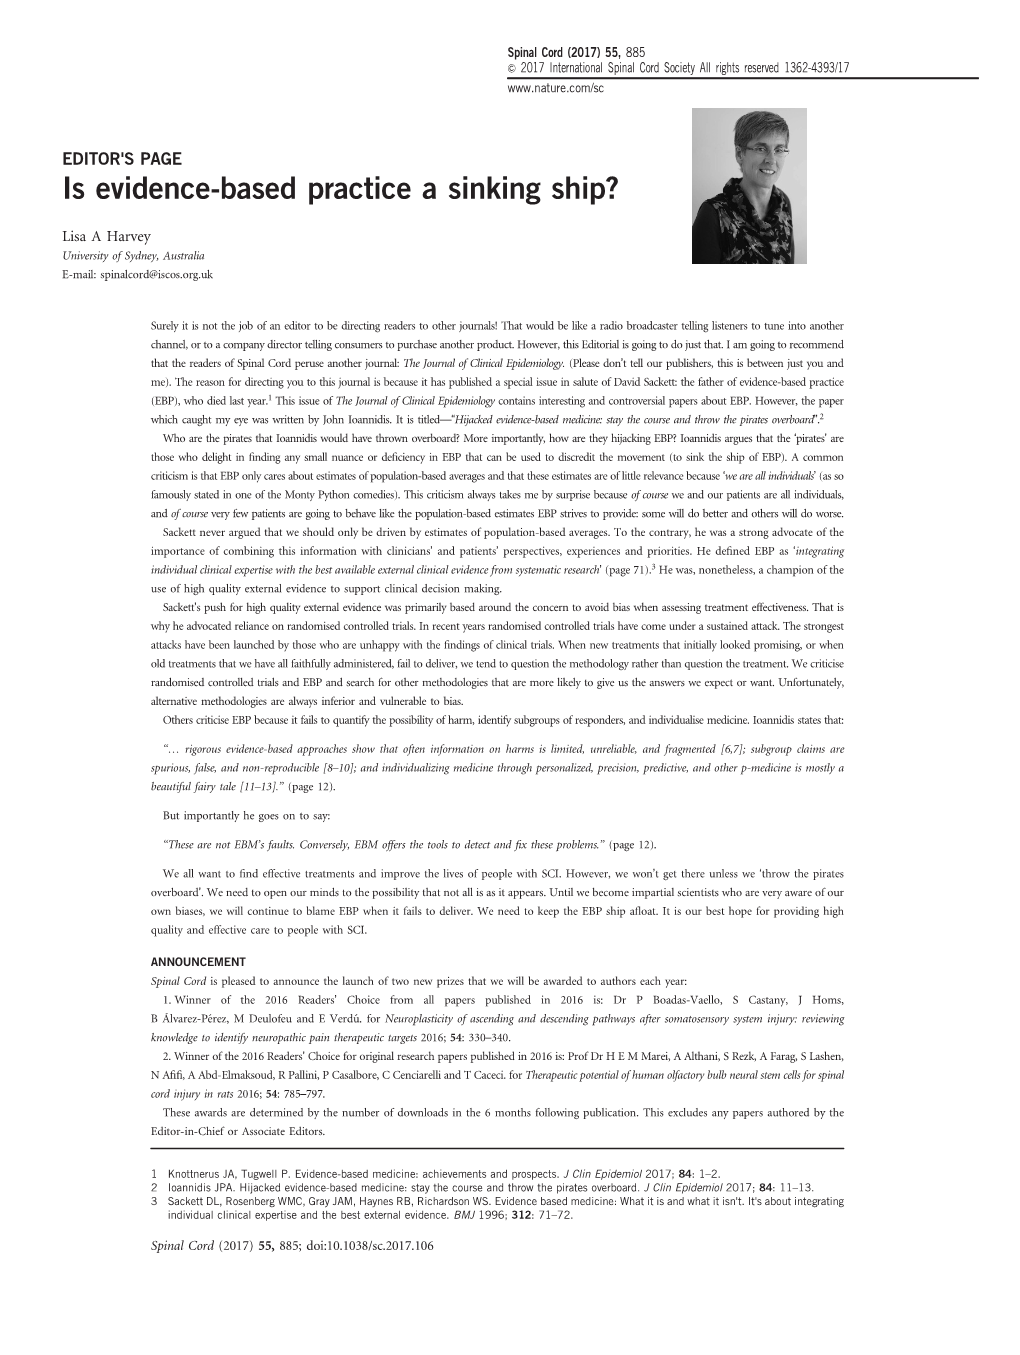 Is Evidence-Based Practice a Sinking Ship&Quest;